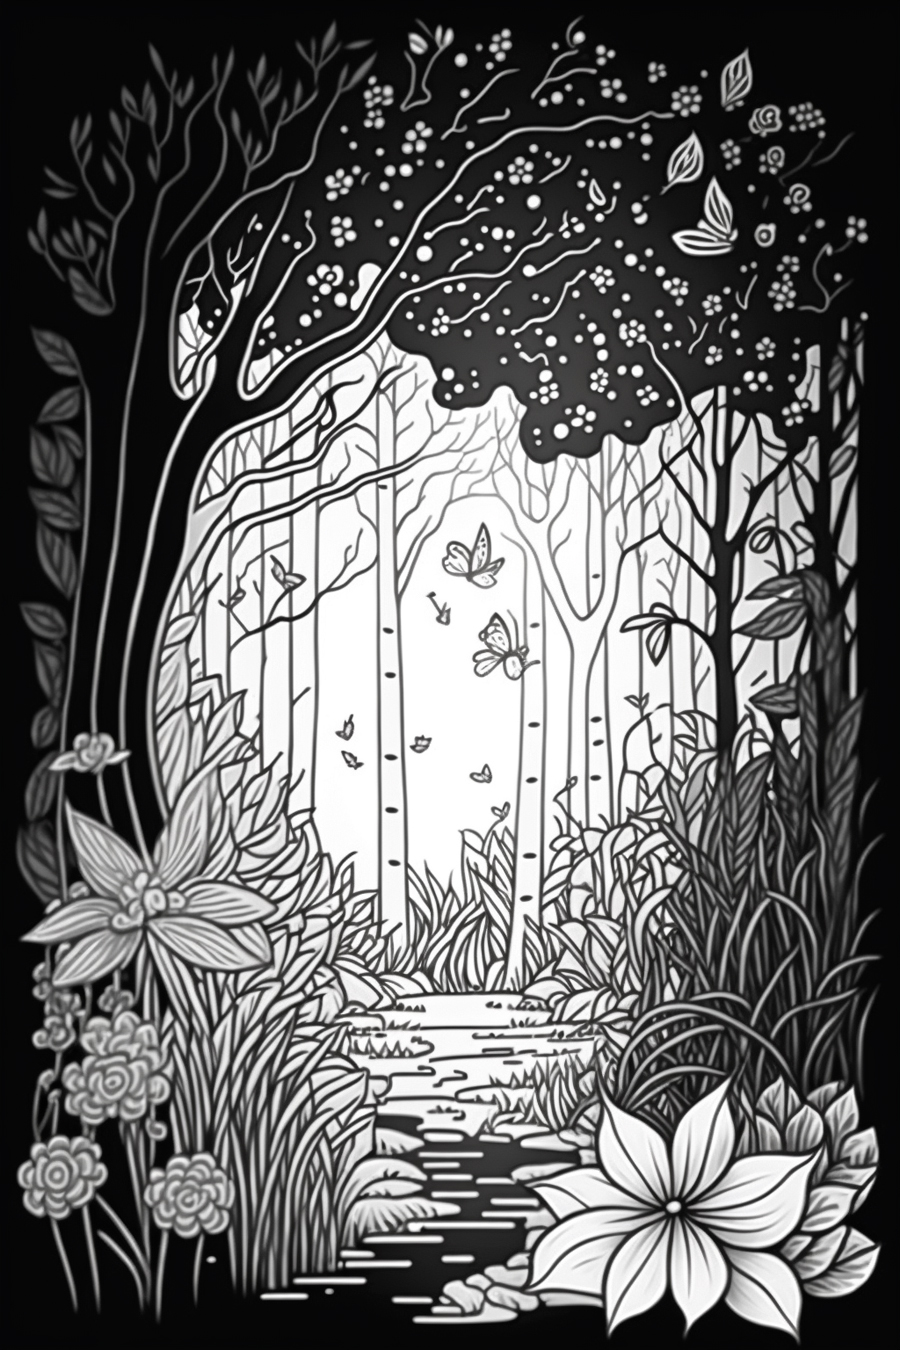 A black and white drawing of a forest with trees and flowers.